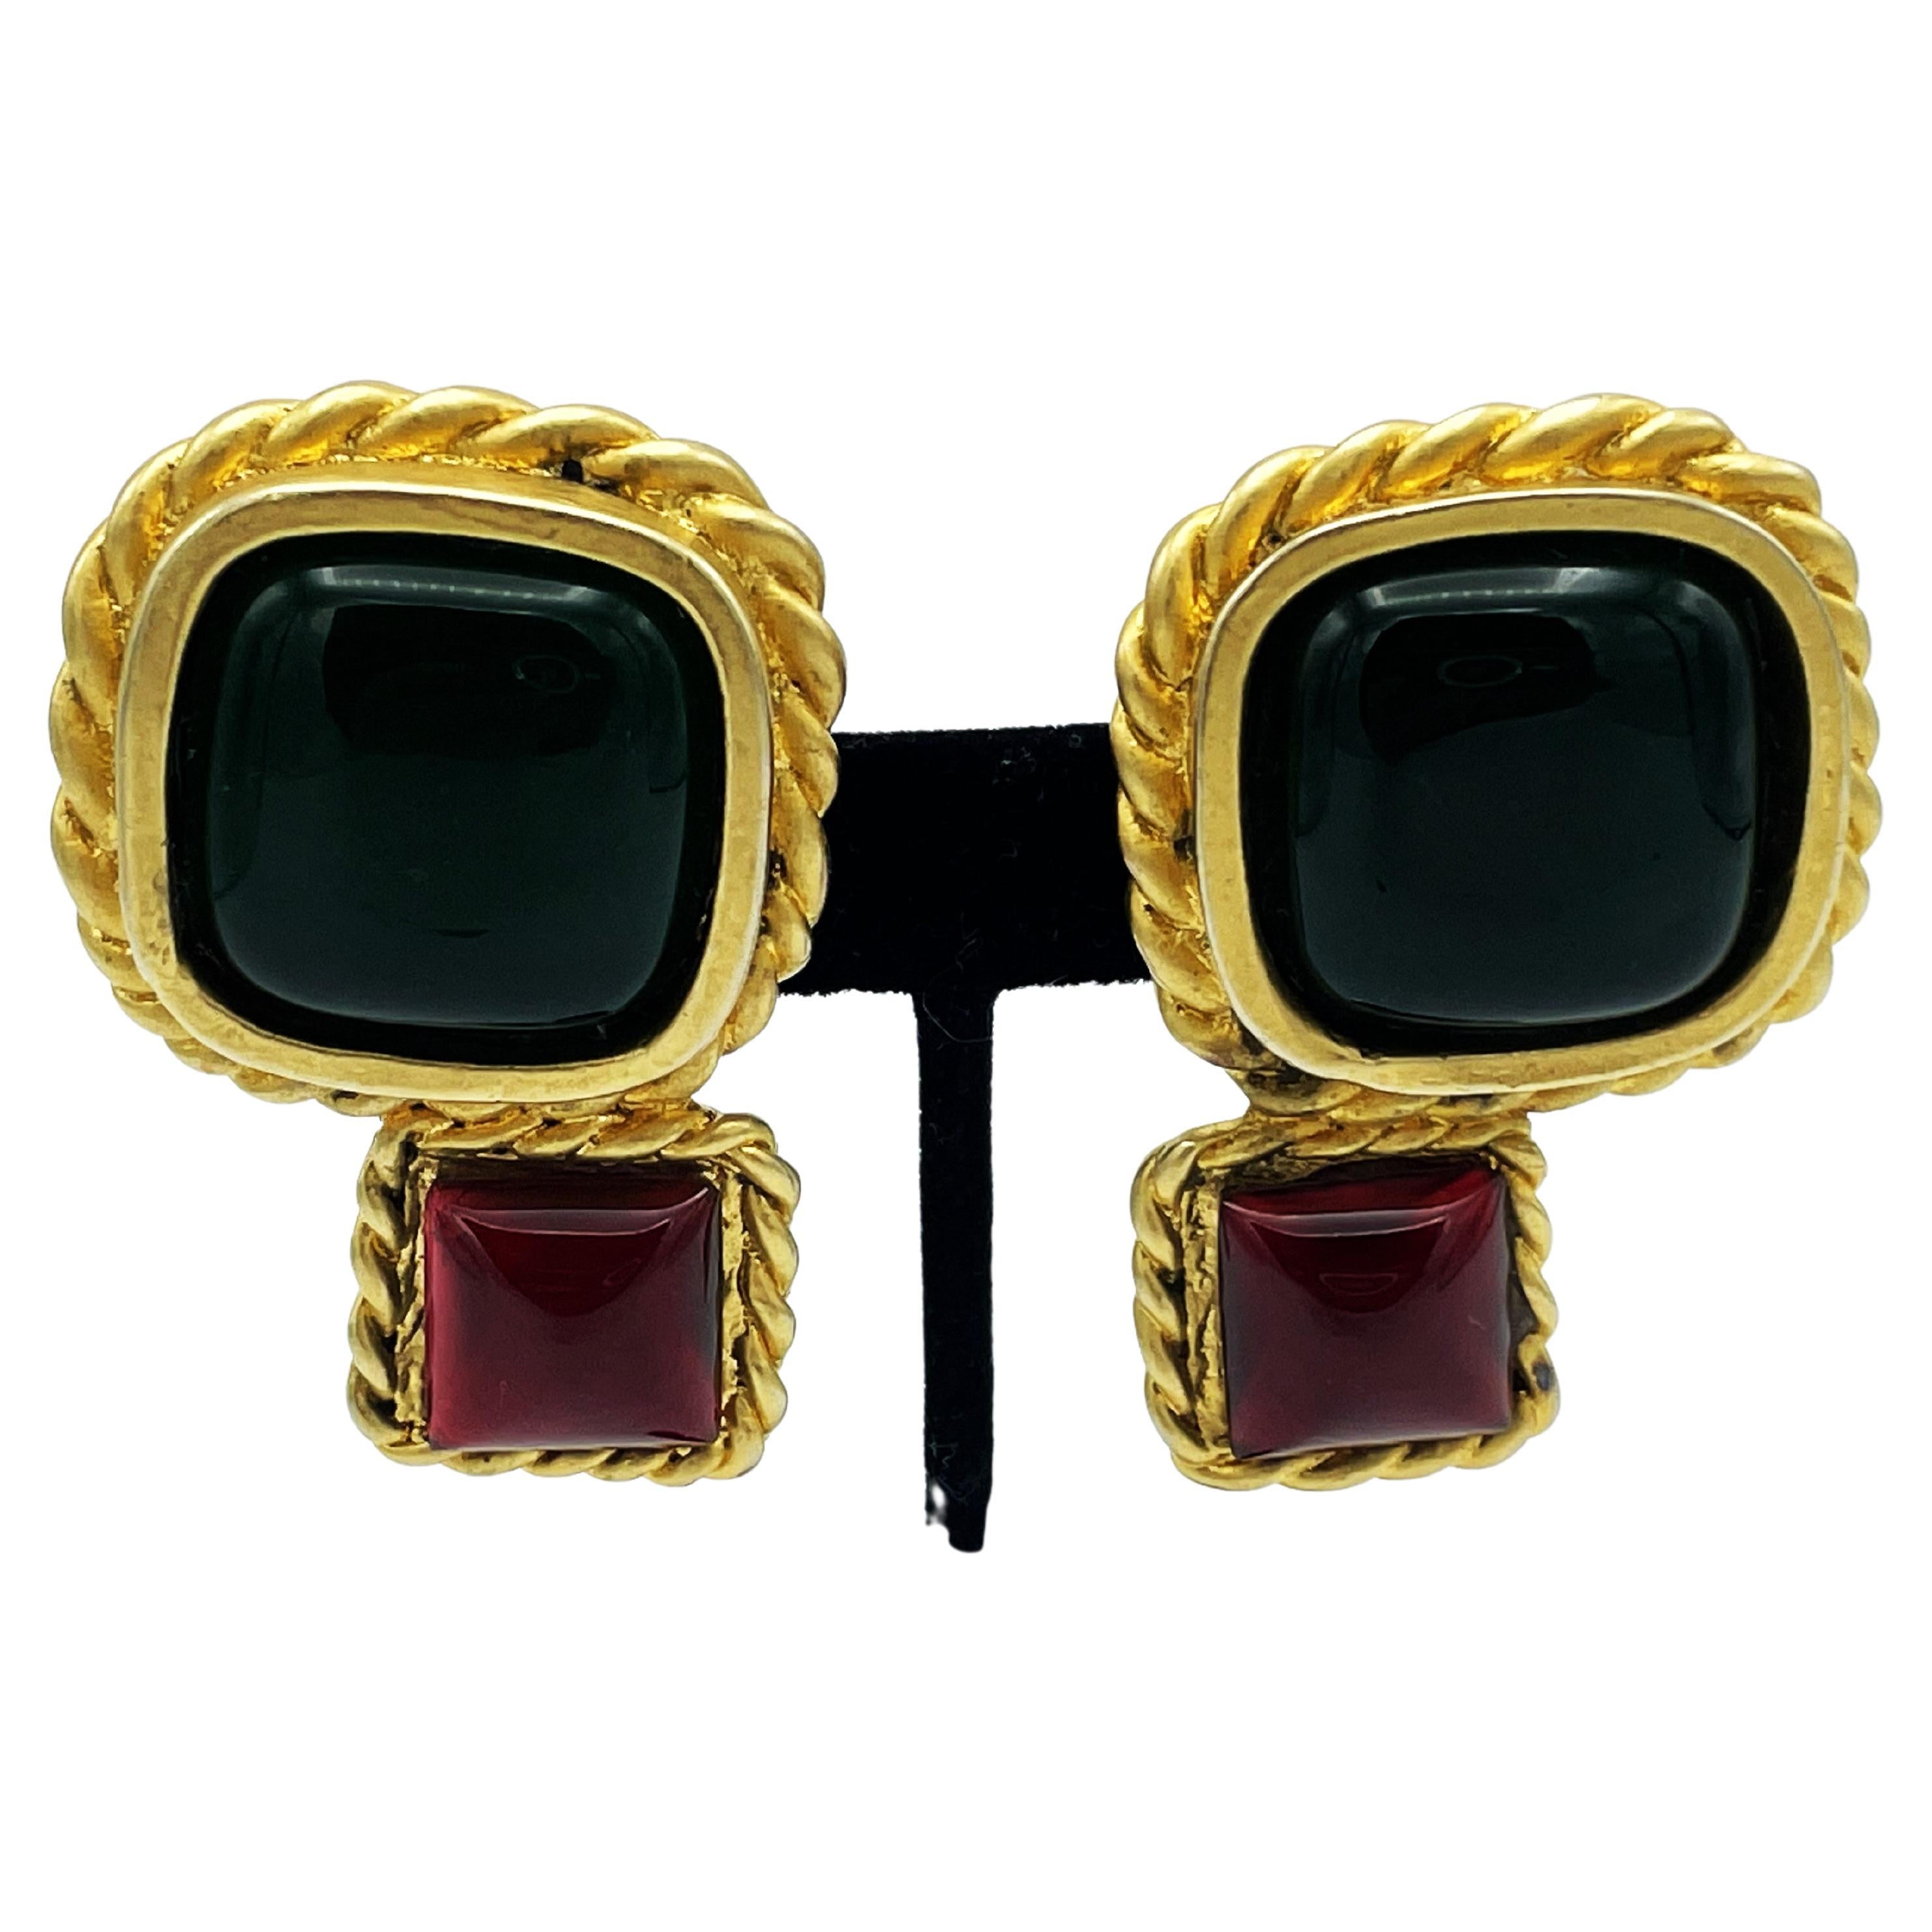 Modern ICONIC CHANEL CLIP-ON EARRING green and red poured glass by Gripoix, Resin 1990s For Sale